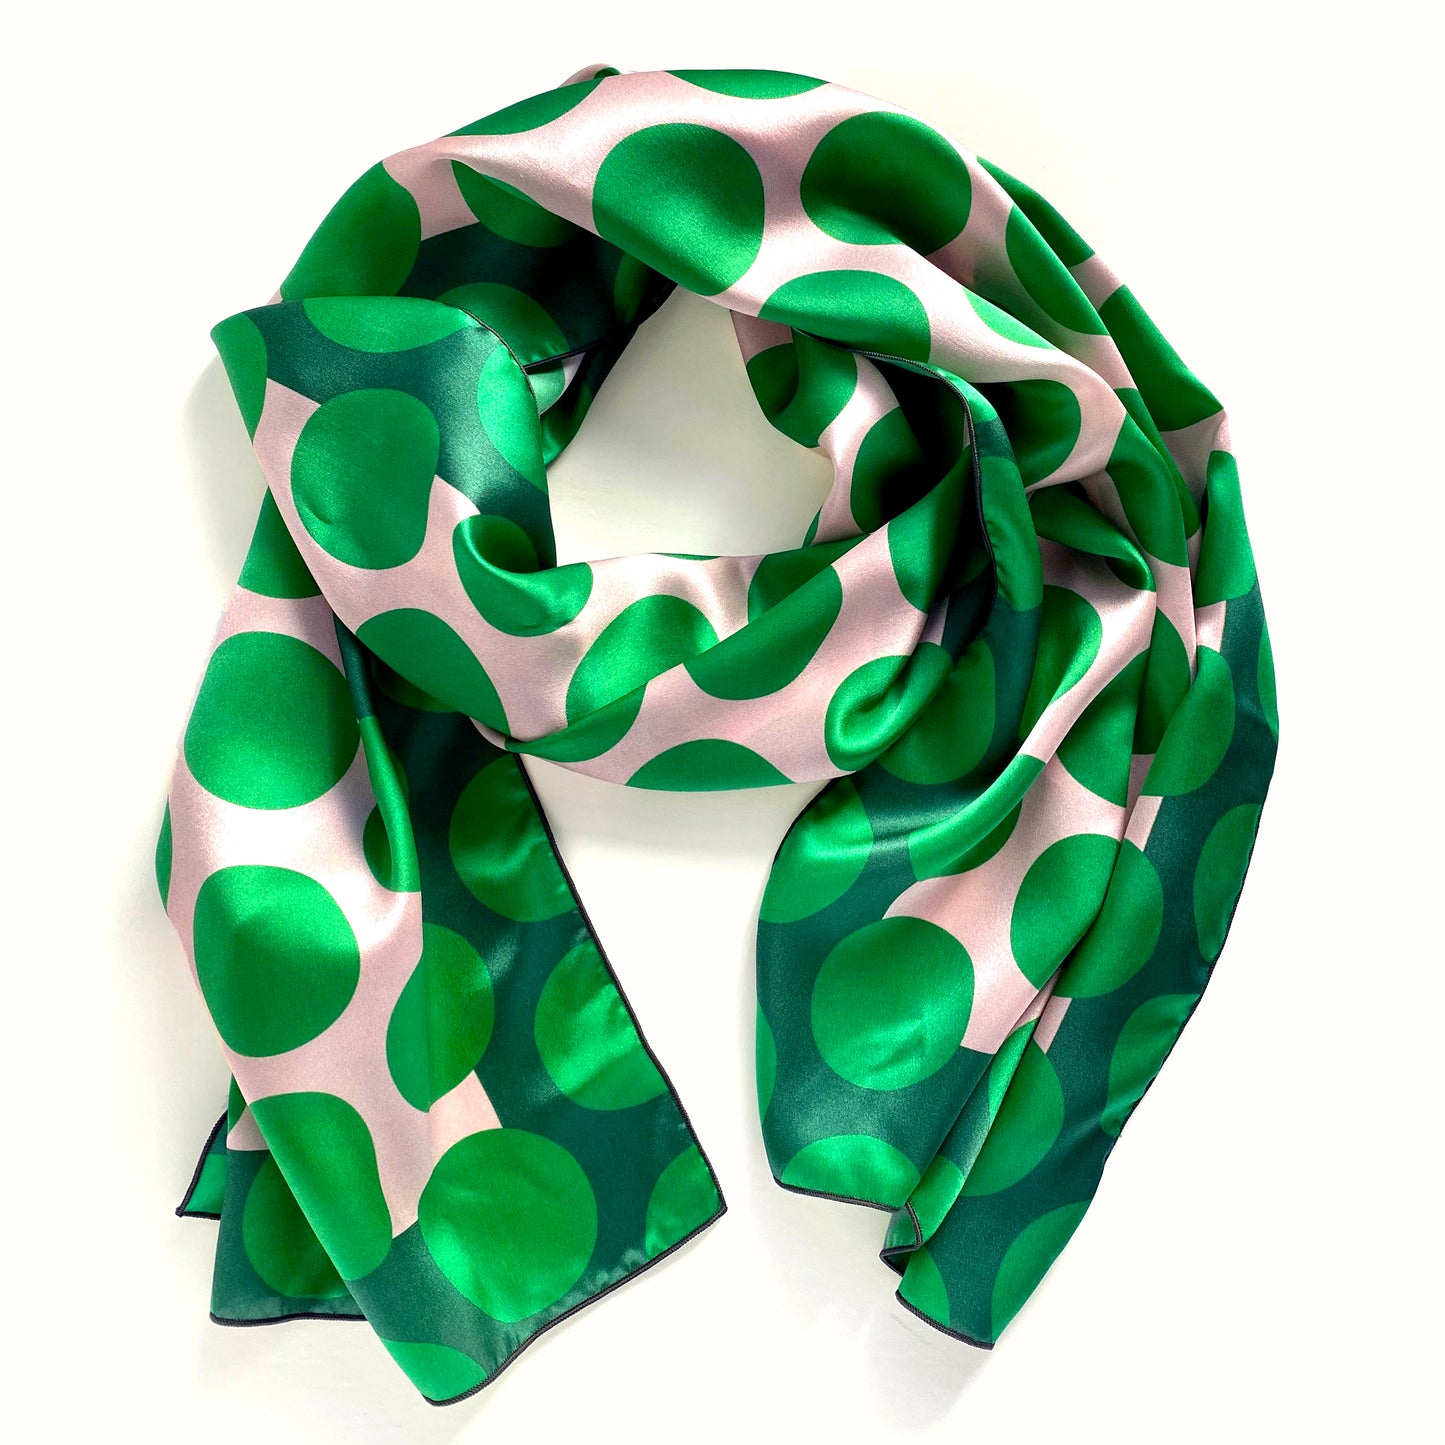 A modern twist on an old favorite. The Polka is a long 100% silk scarf in bold greens and white